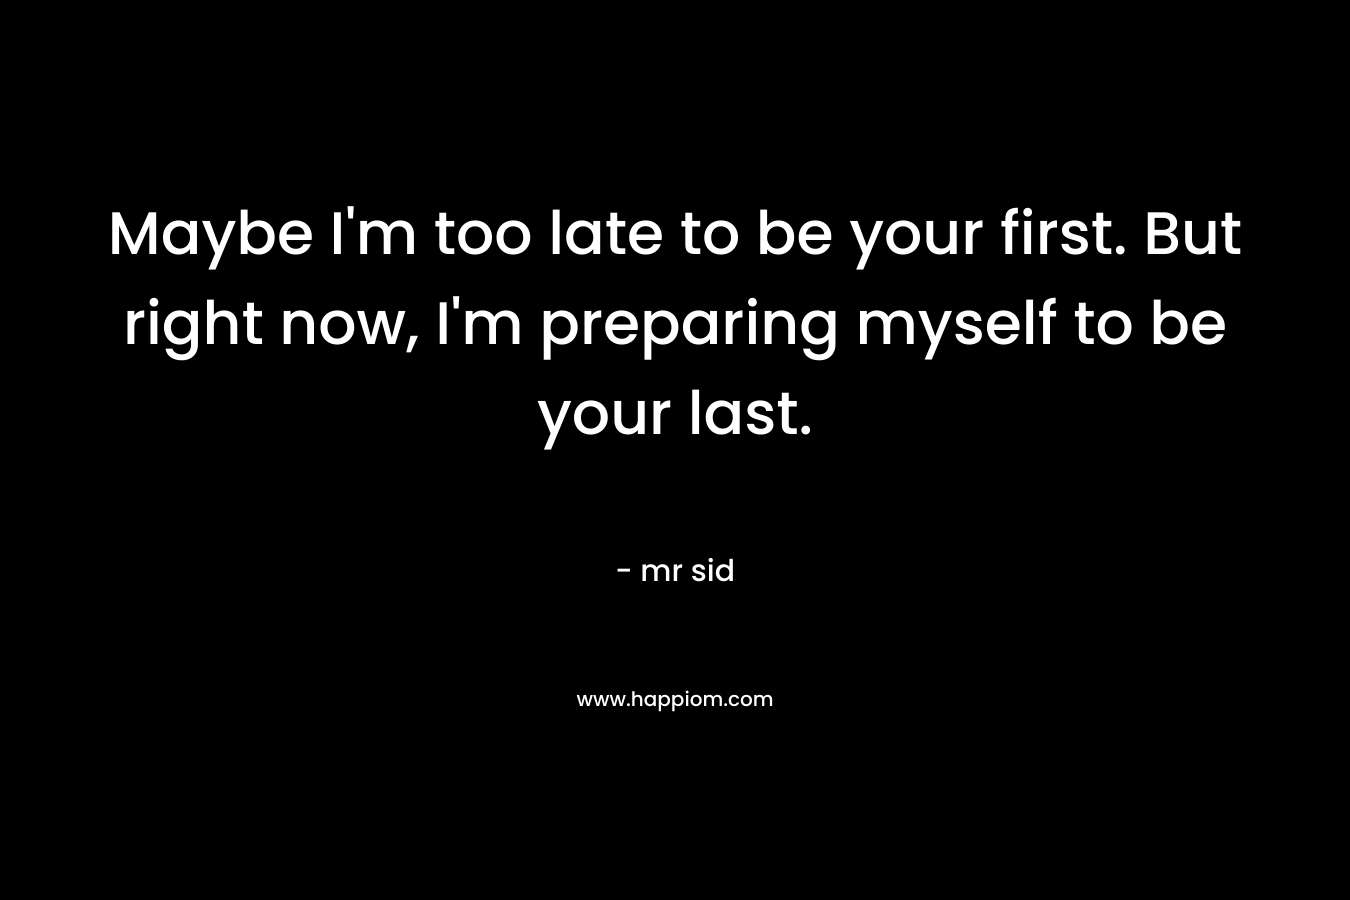 Maybe I’m too late to be your first. But right now, I’m preparing myself to be your last. – mr sid